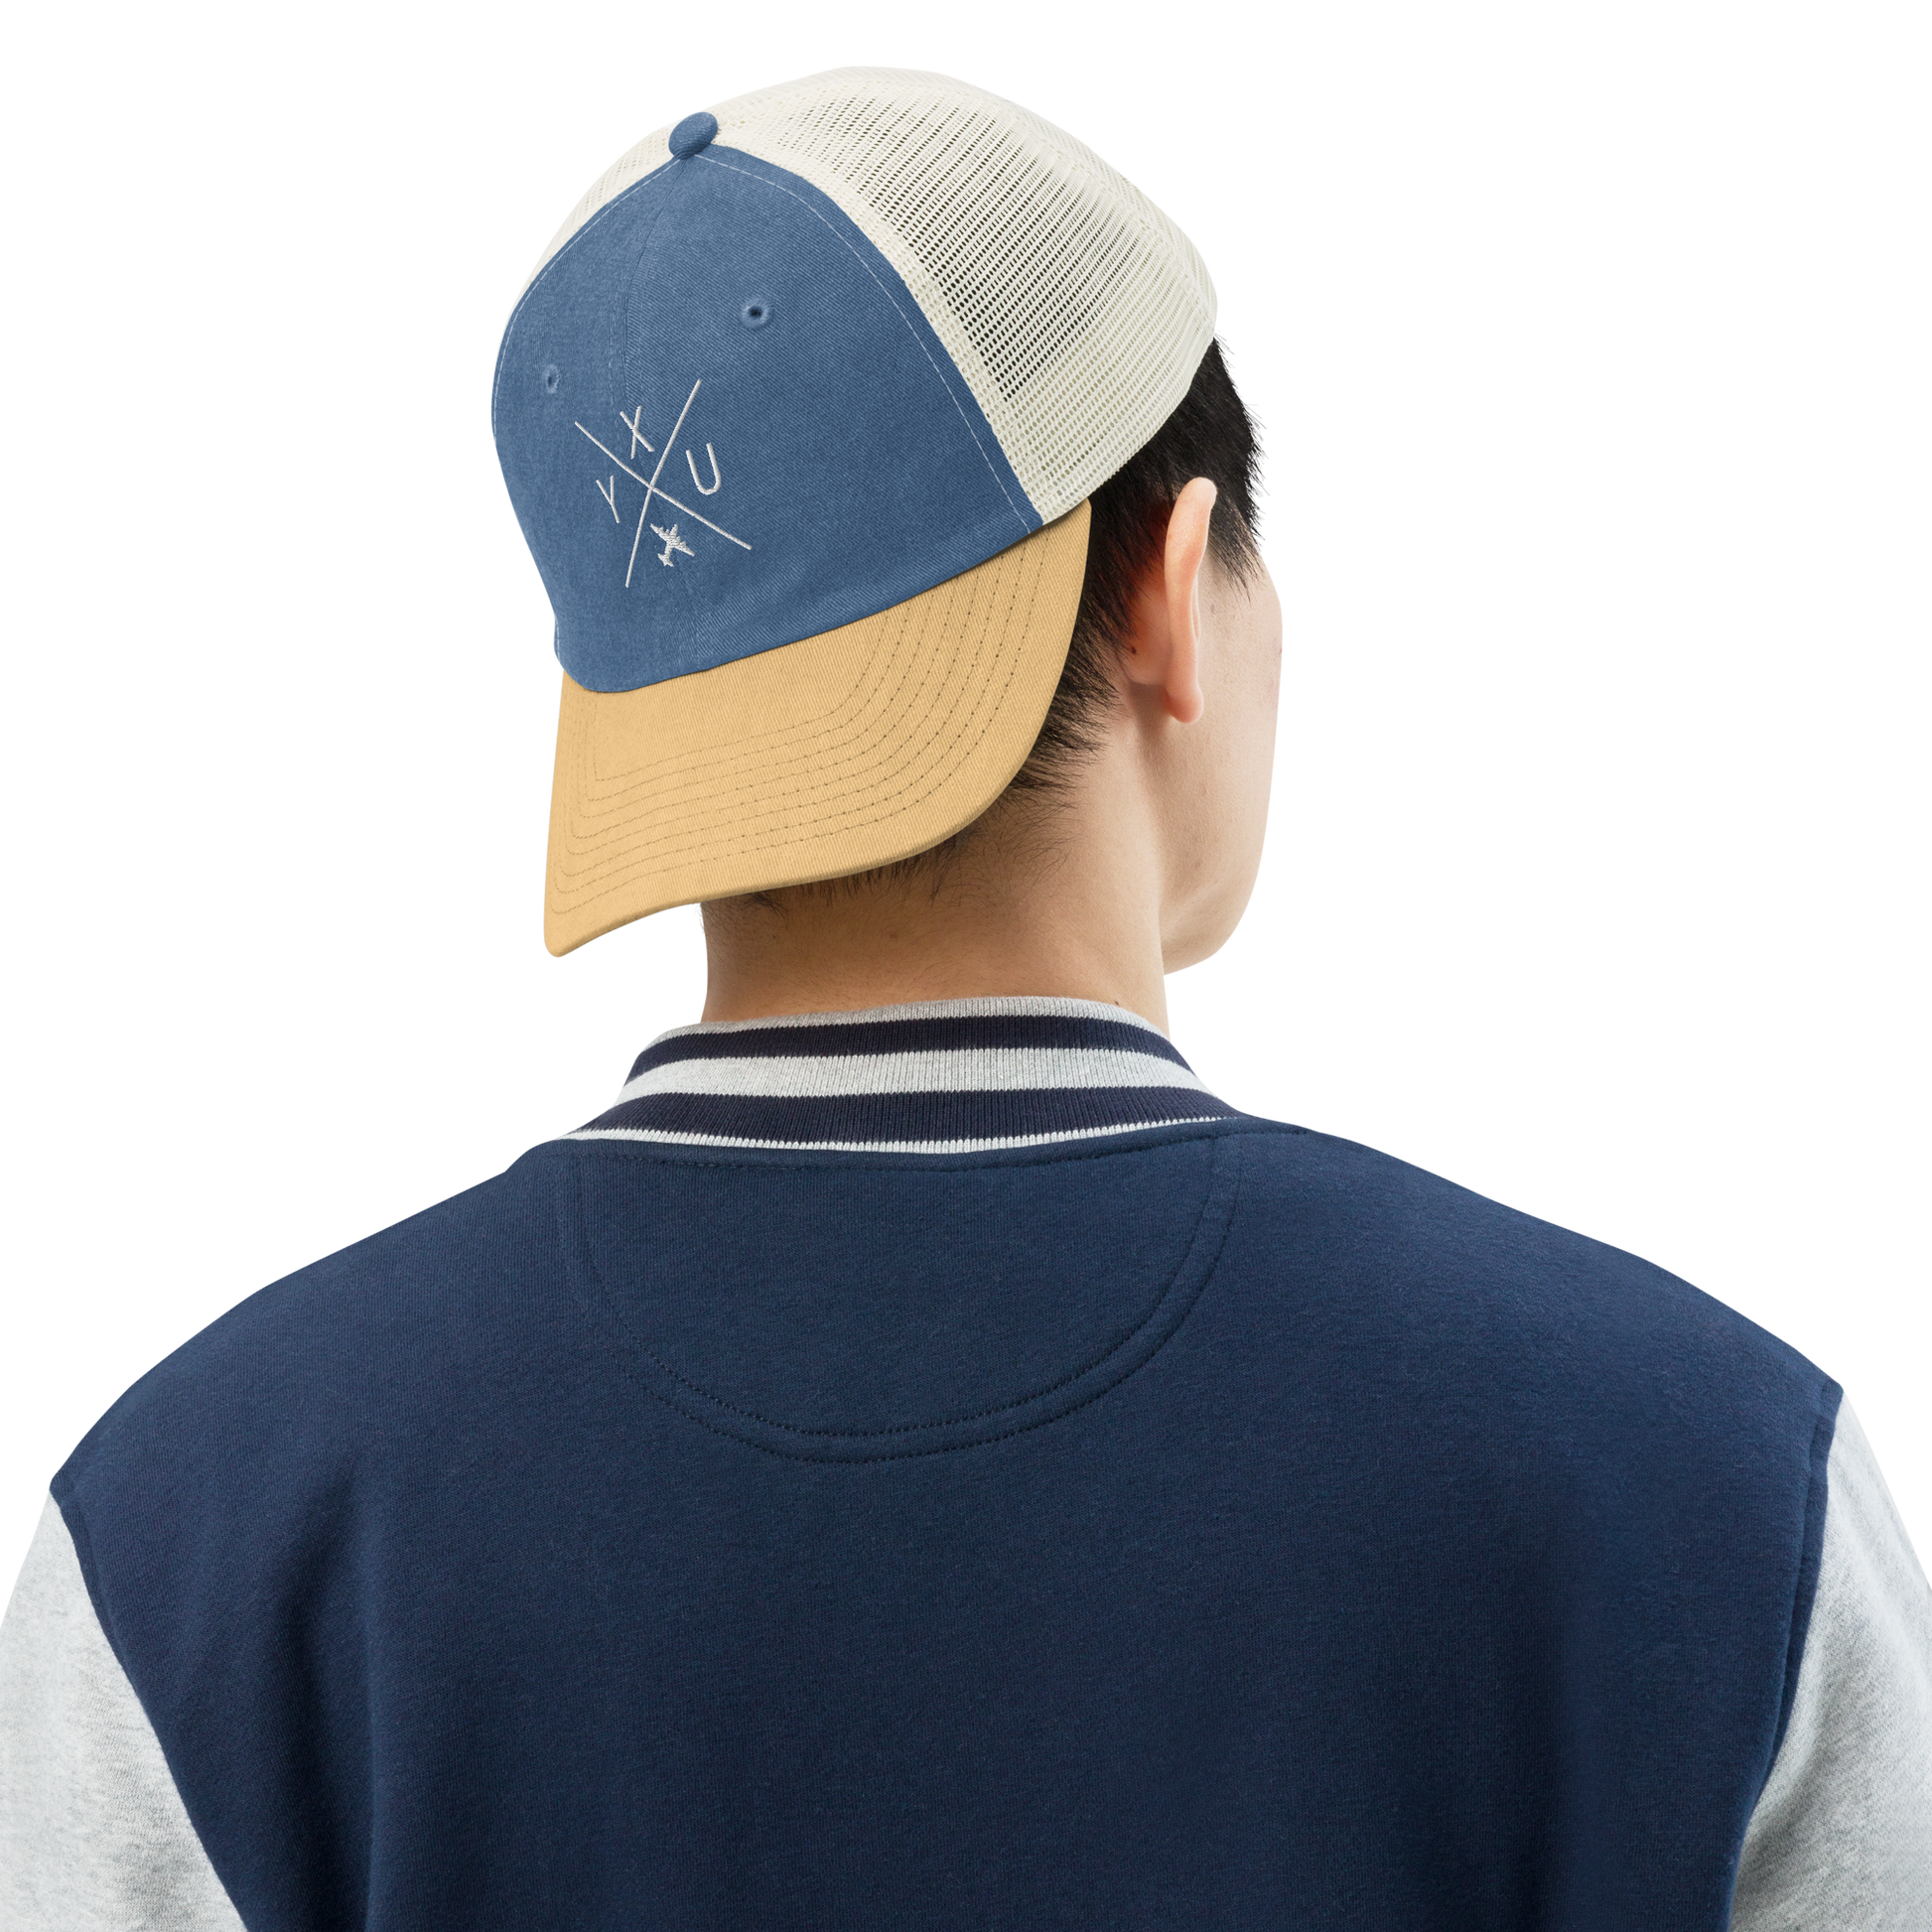 YHM Designs - YXU London Pigment-Dyed Trucker Cap - Crossed-X Design with Airport Code and Vintage Propliner - White Embroidery - Image 04